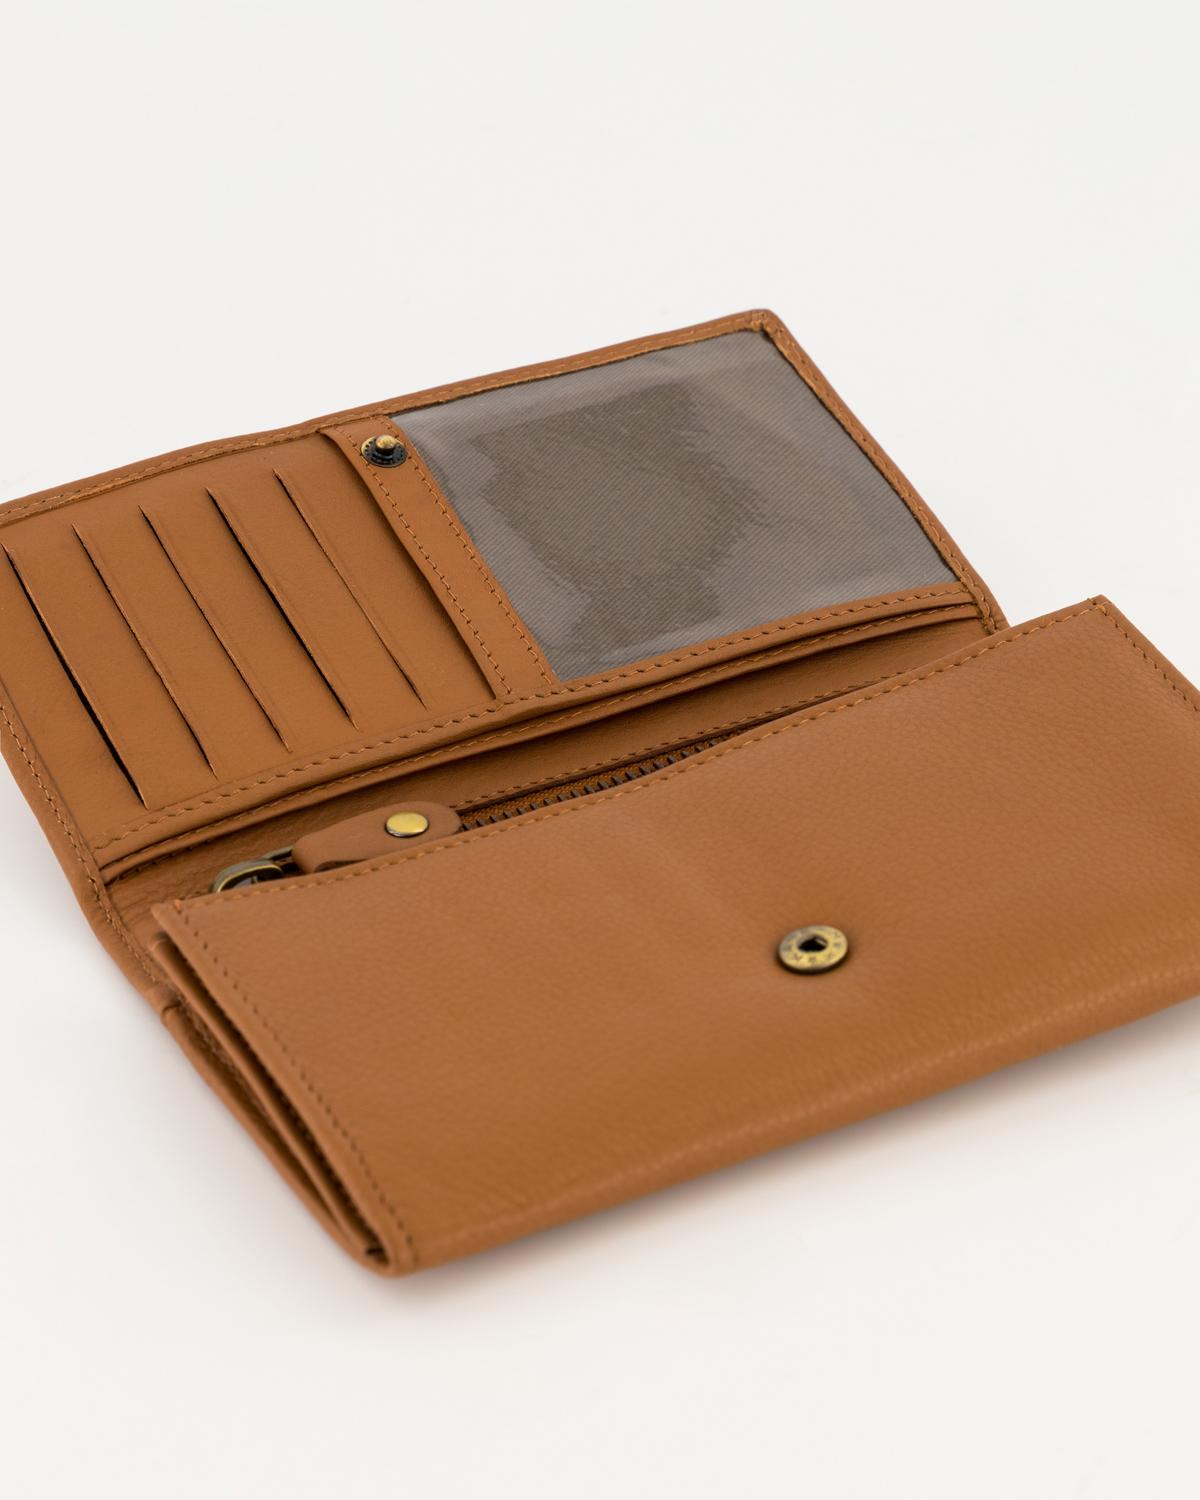 Zintle Fold-Over Leather Wallet -  Tan